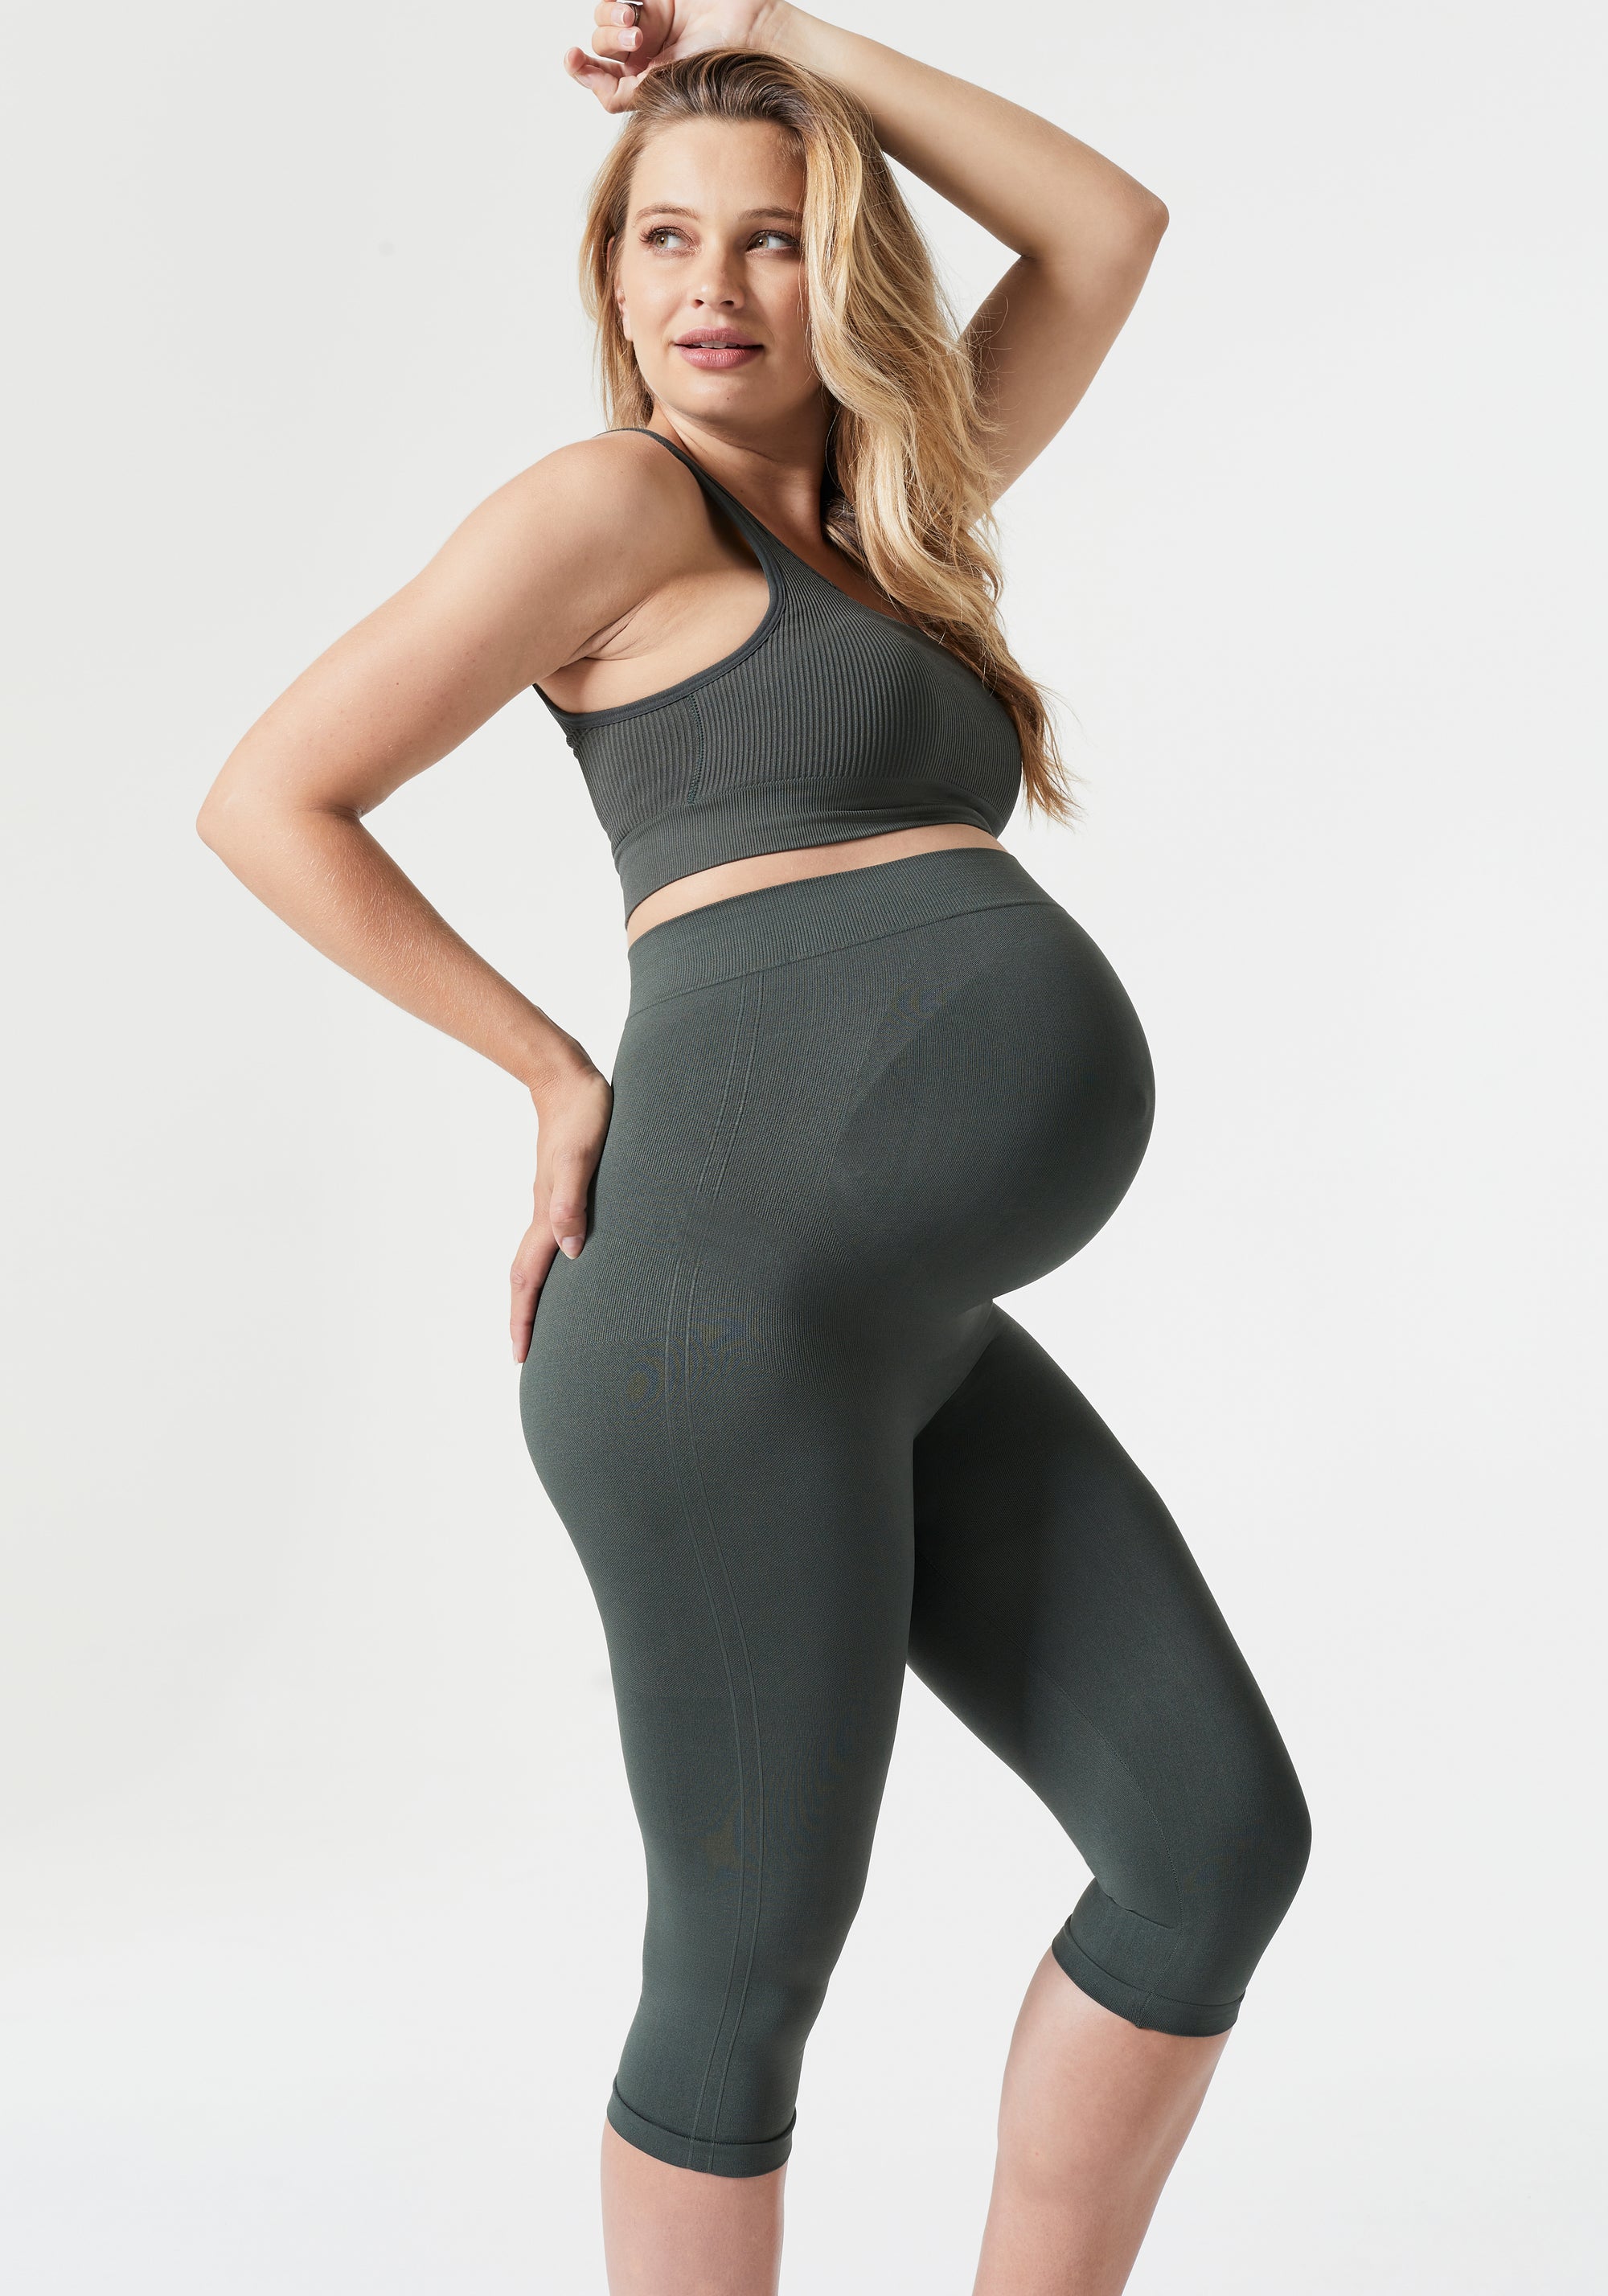 Comfortable and Stylish Maternity Leggings for Expecting Moms